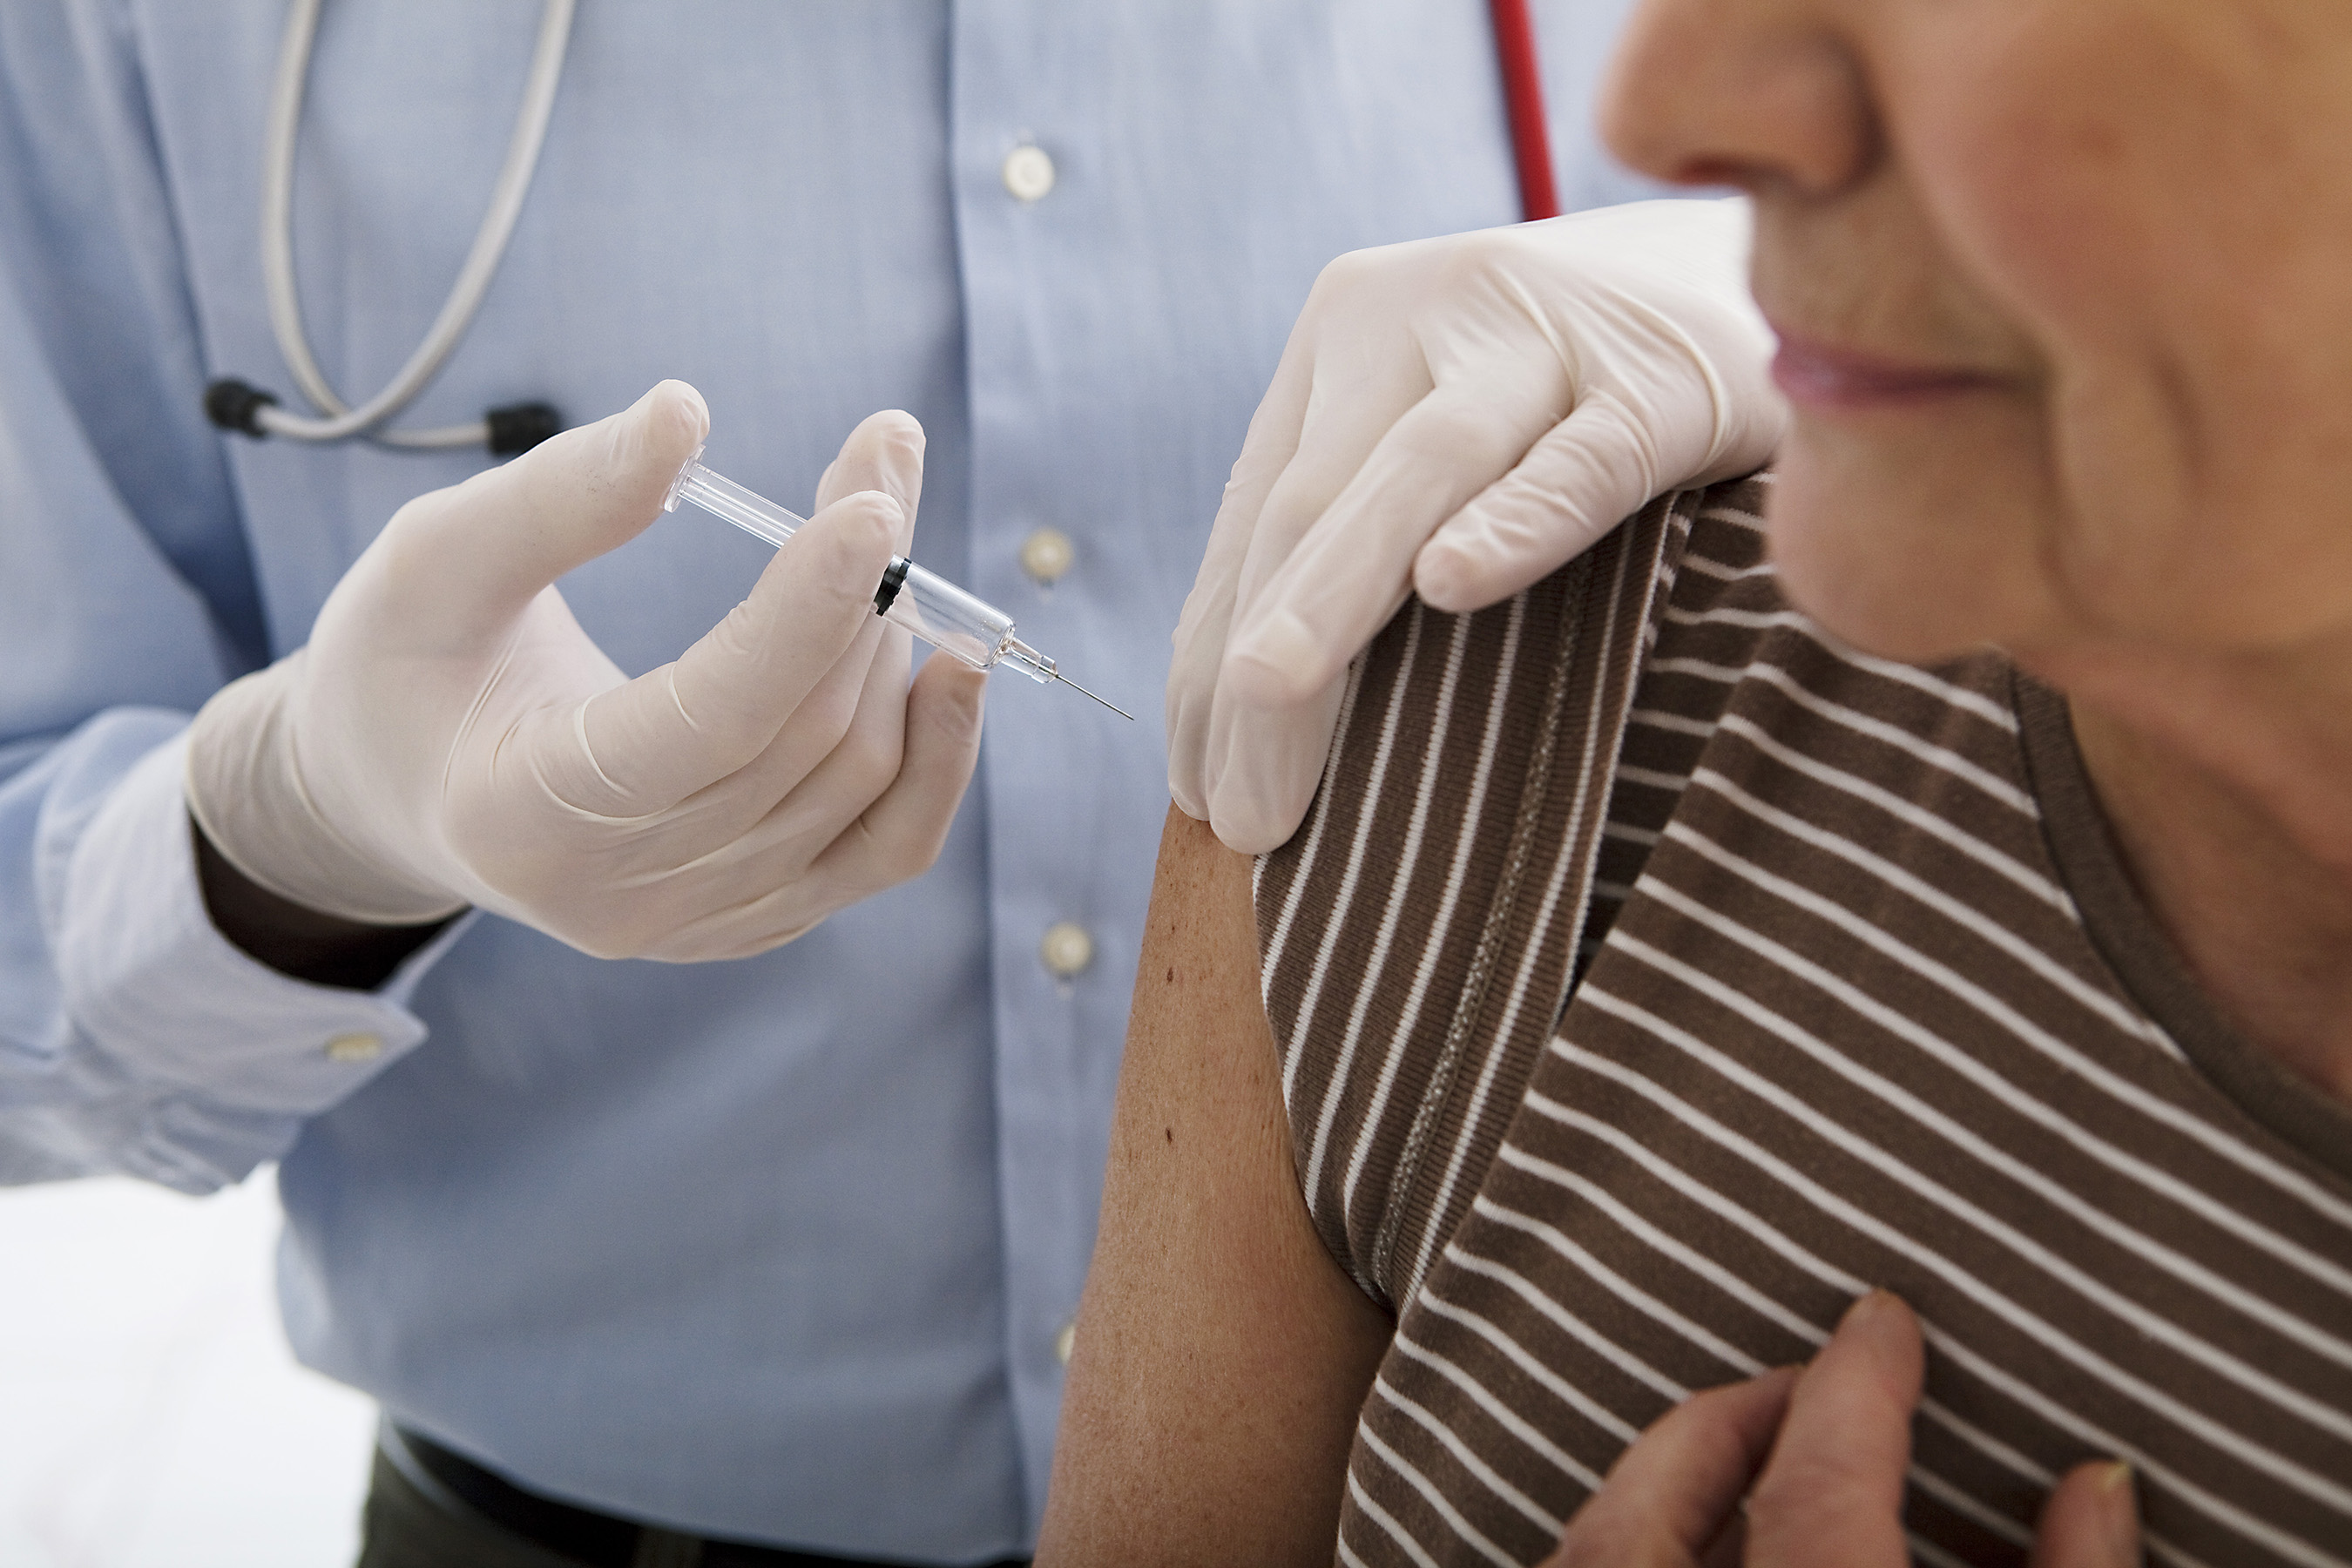 Annual flu vaccines become available starting in August